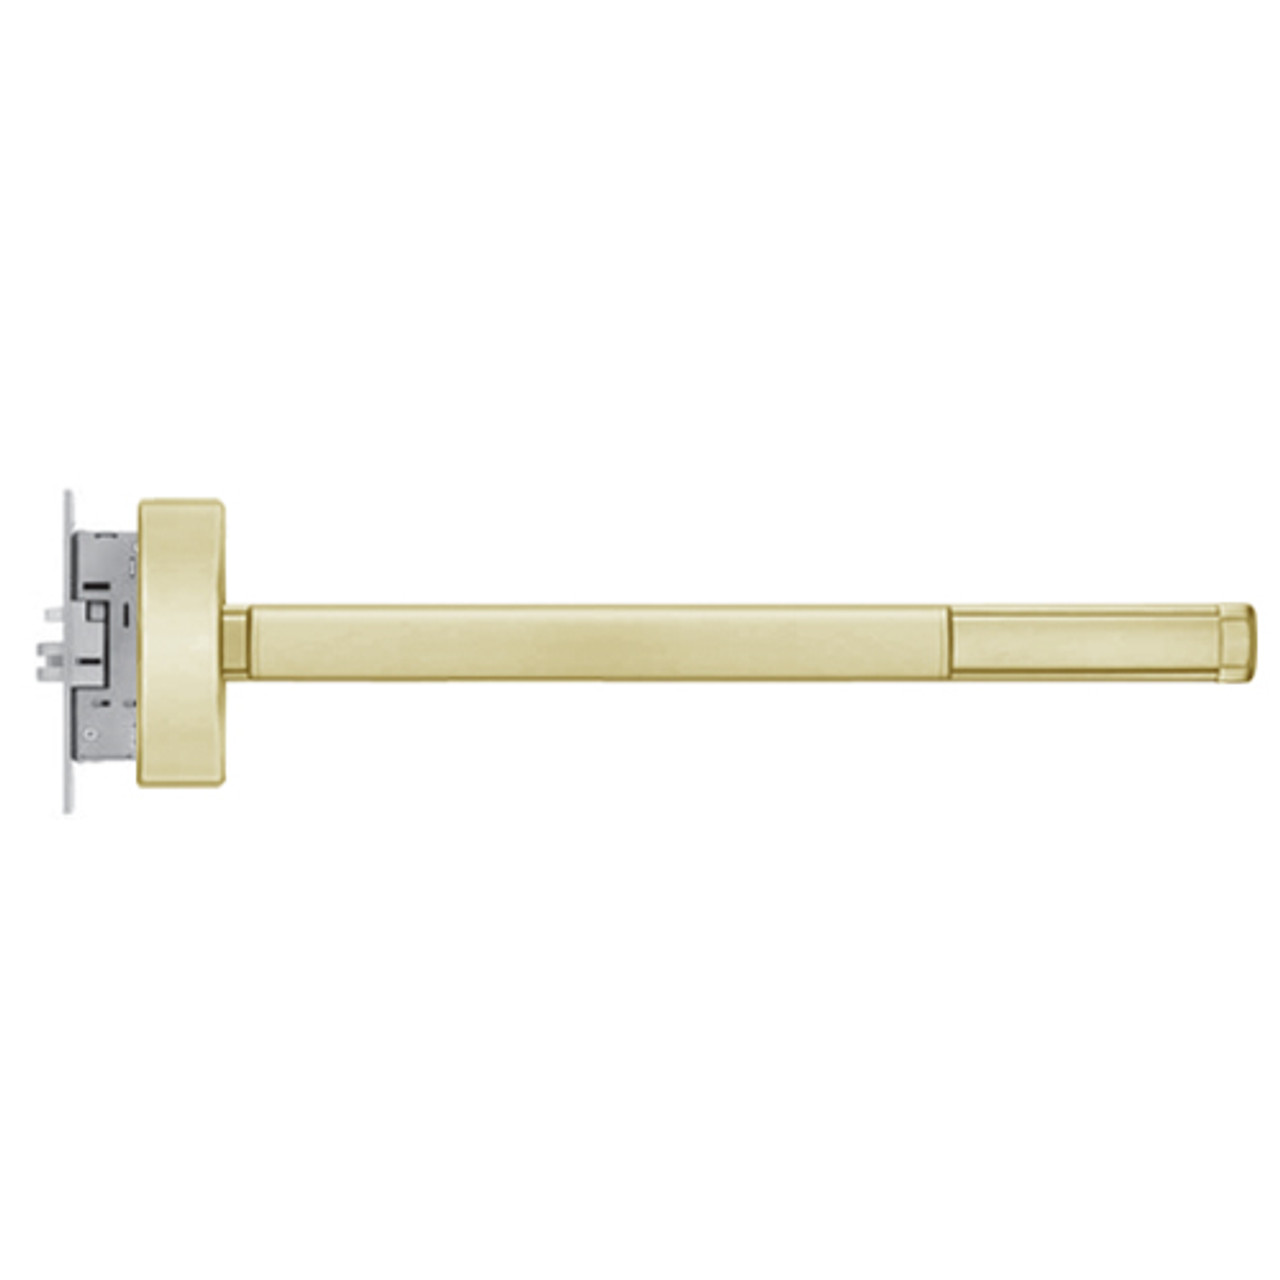 FL2308-LHR-606-48 PHI 2300 Series Fire Rated Apex Mortise Exit Device Prepped for Key Controls Lever/Knob in Satin Brass Finish